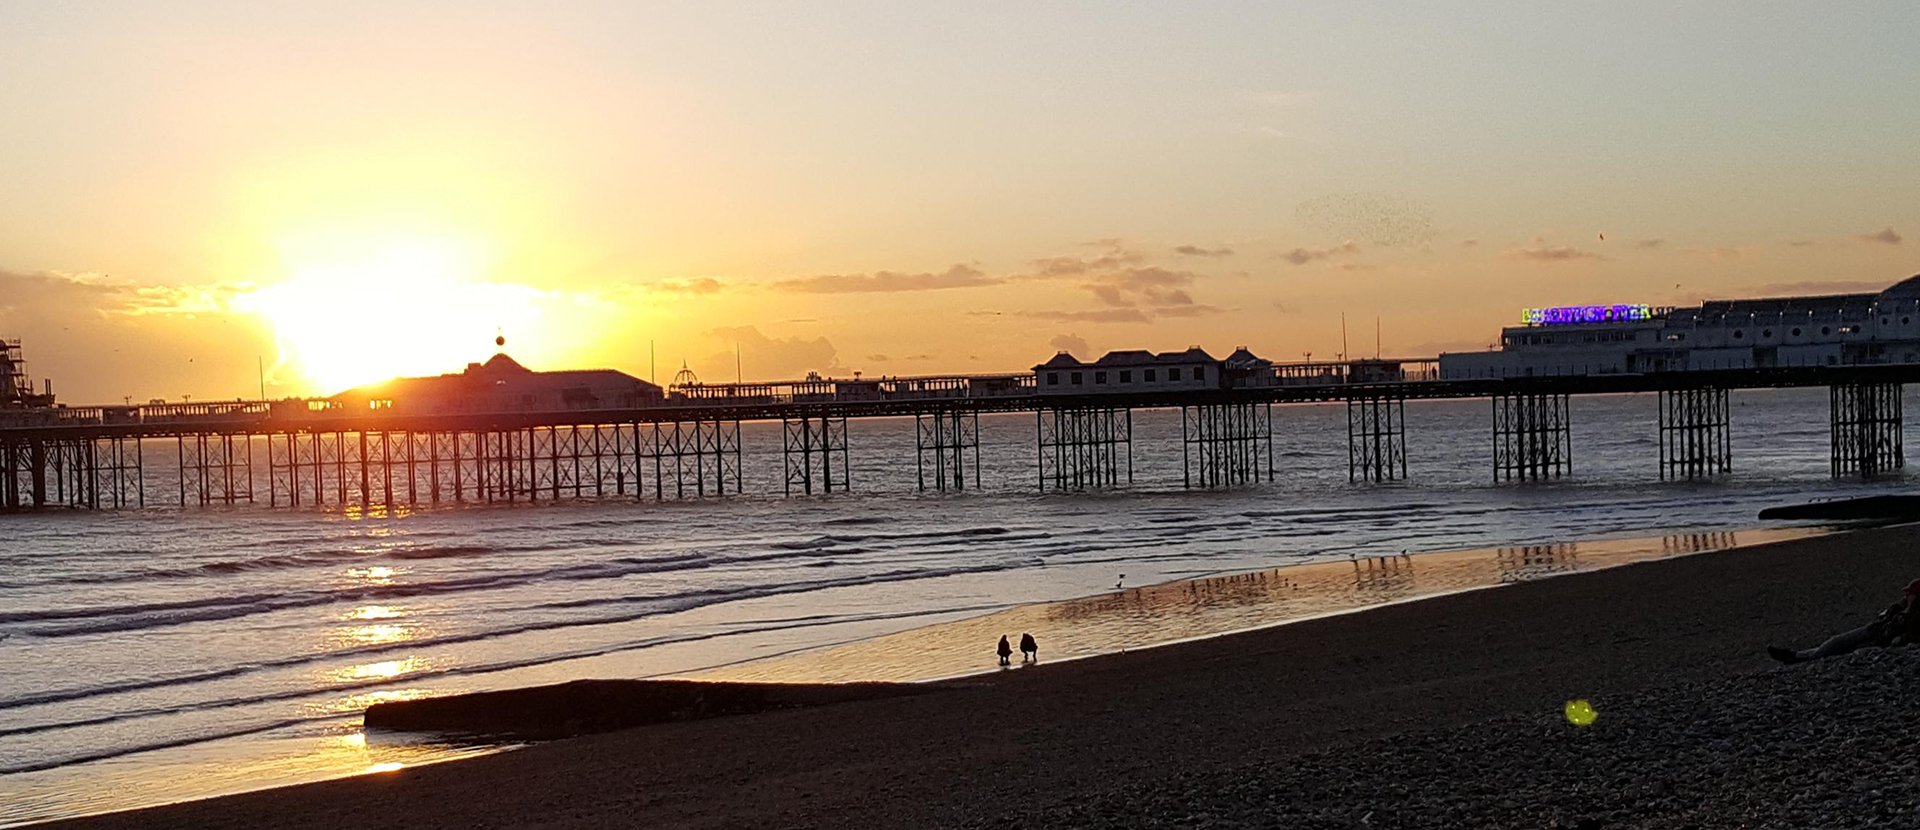 A sunset view of Brighton Pier